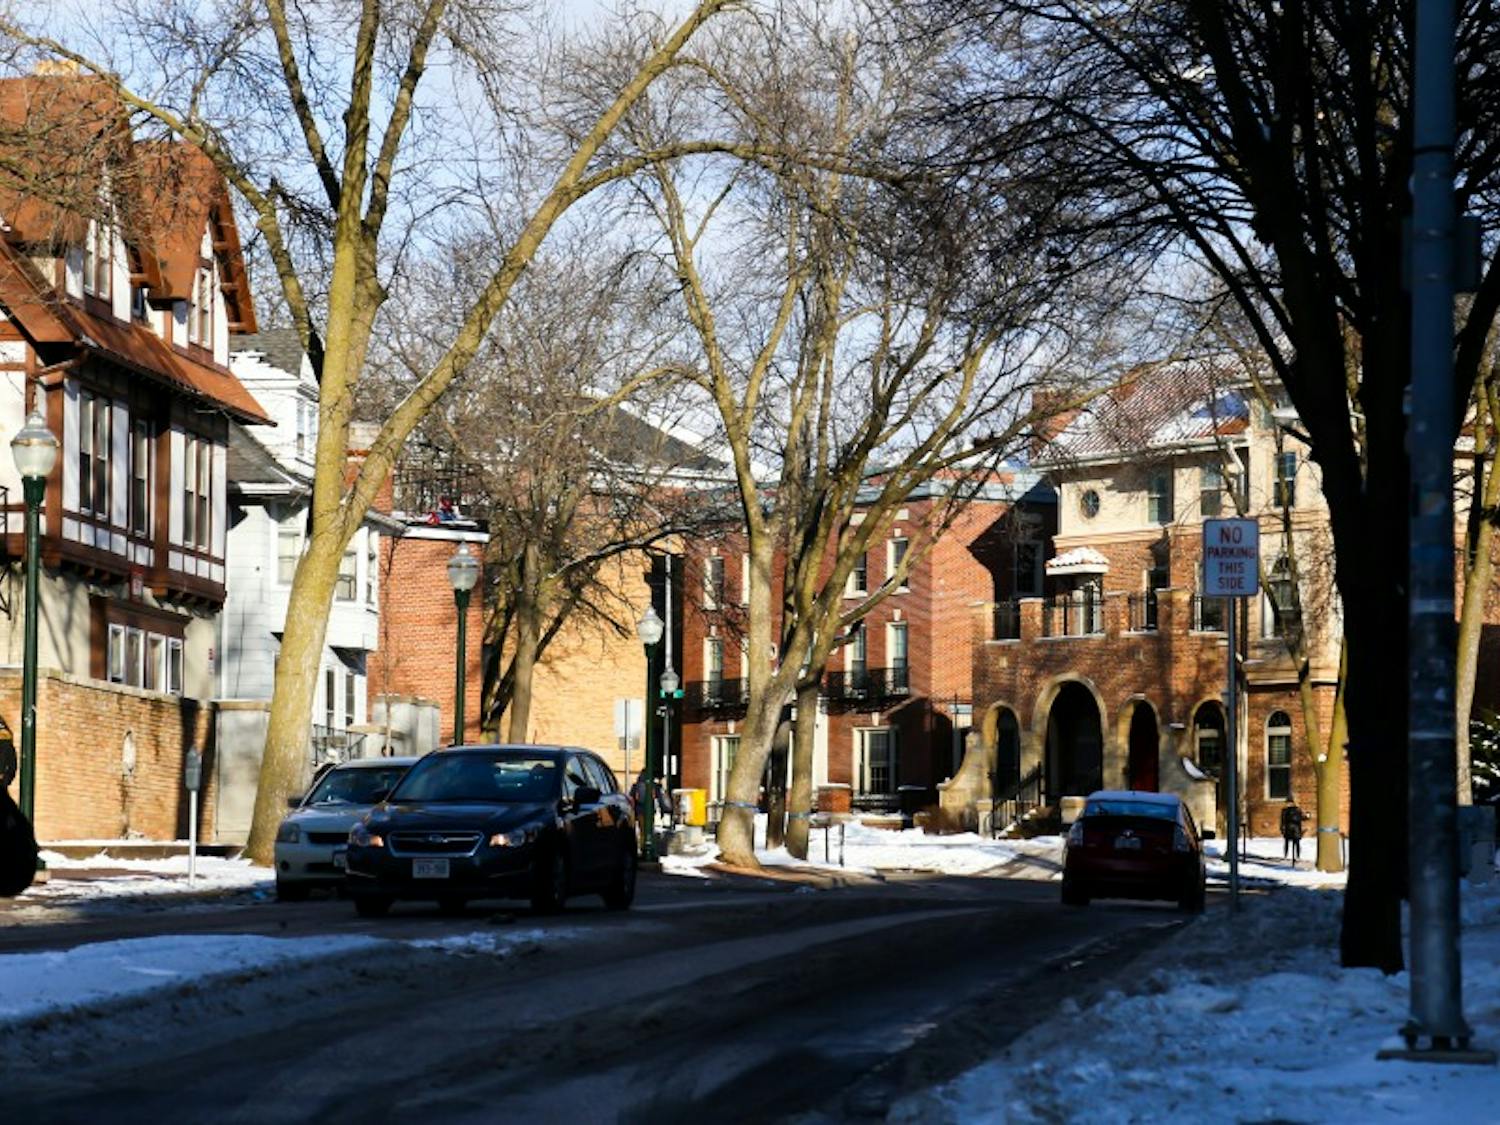 A UW-Madison student told police she is concerned she was sexually assaulted at a fraternity house on Langdon Street.